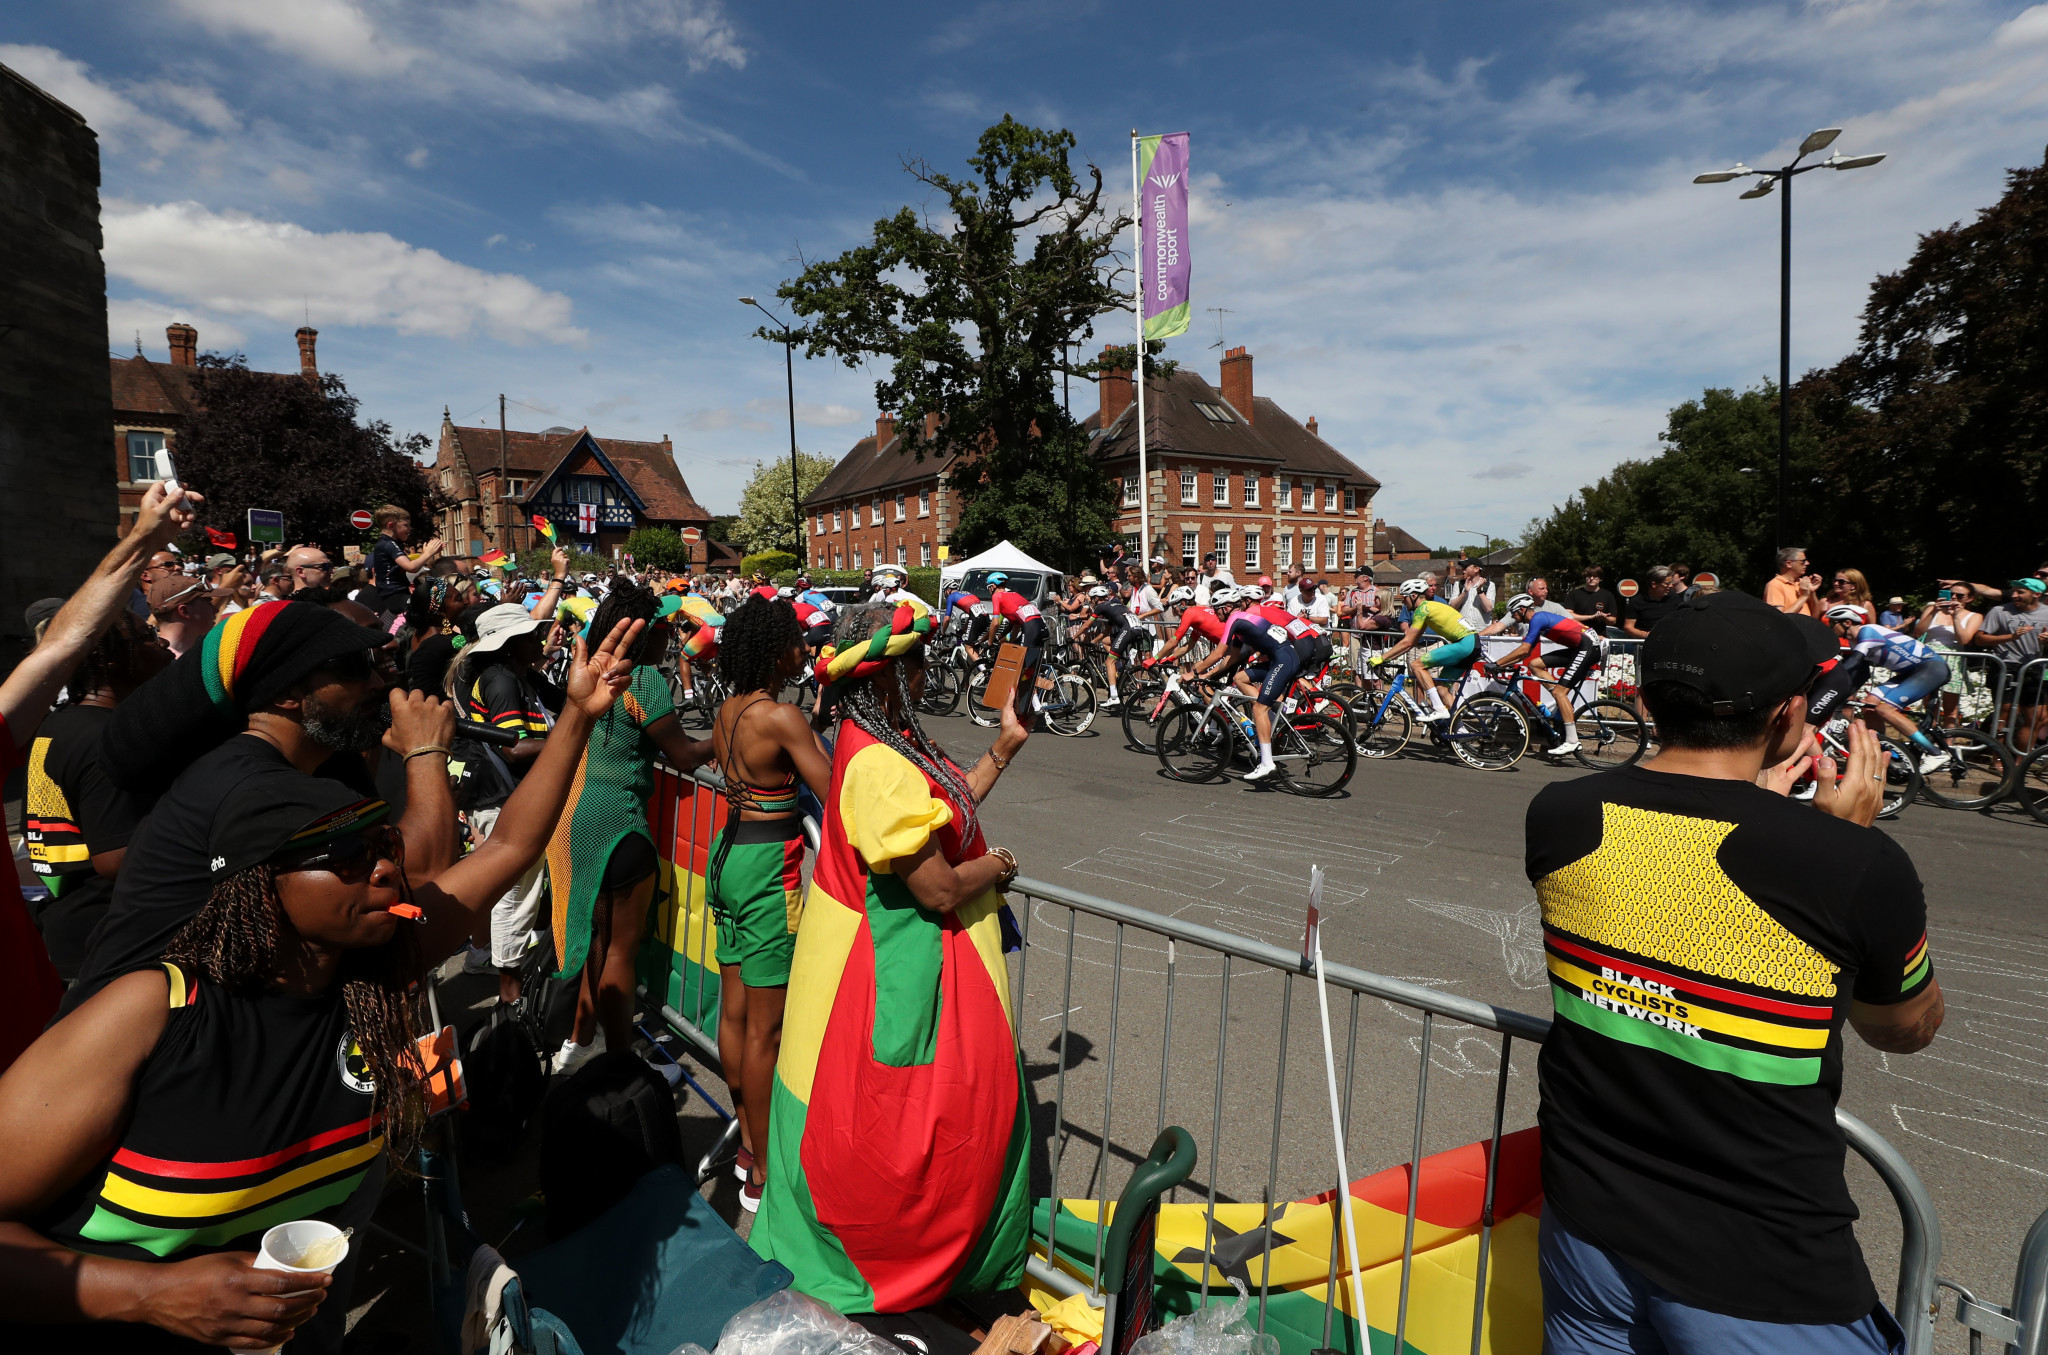 Nine athletes represented Ghana in cycling at the Birmingham 2022 Commonwealth Games, and Kwaku Ofosu-Asare expressed hope that the hosts could medal at next year's African Games ©Getty Images